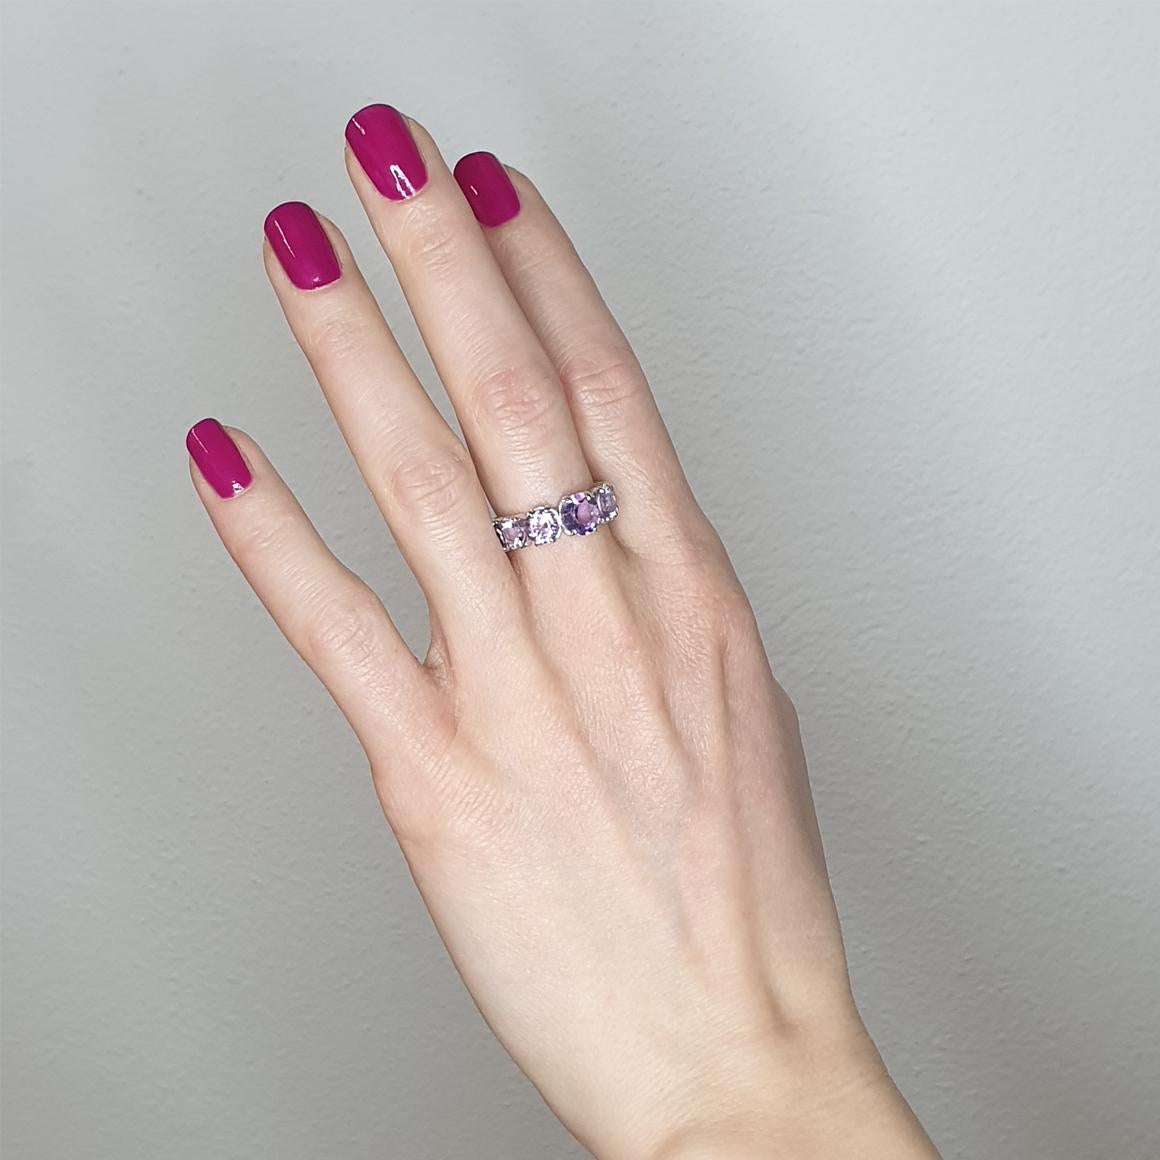 Classic and trendy ring , not only wedding ring but also a ring for every occasion with fantastic colors. Design and craftmanship made in Italy by Stanoppi Jewellery since 1948.

Classic ring in 18 karat gold with Amethyst cut (size: 7, 6, 5, 4mm)